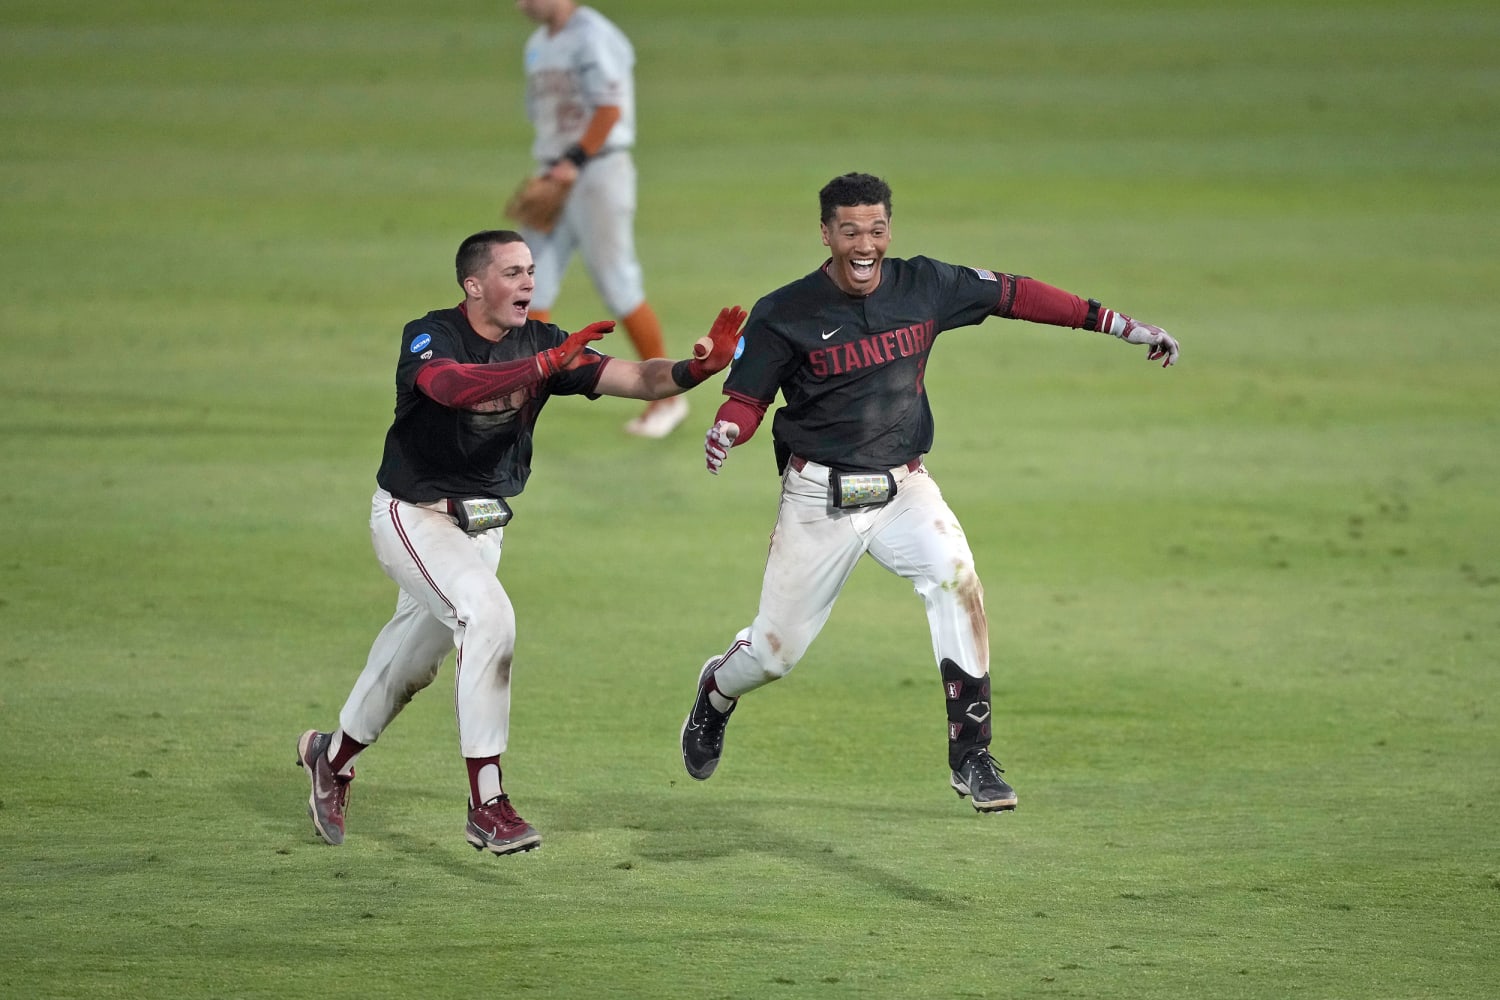 Stanford, Texas ending Ball lost in the twilight ends in miracle win to clinch College World Series